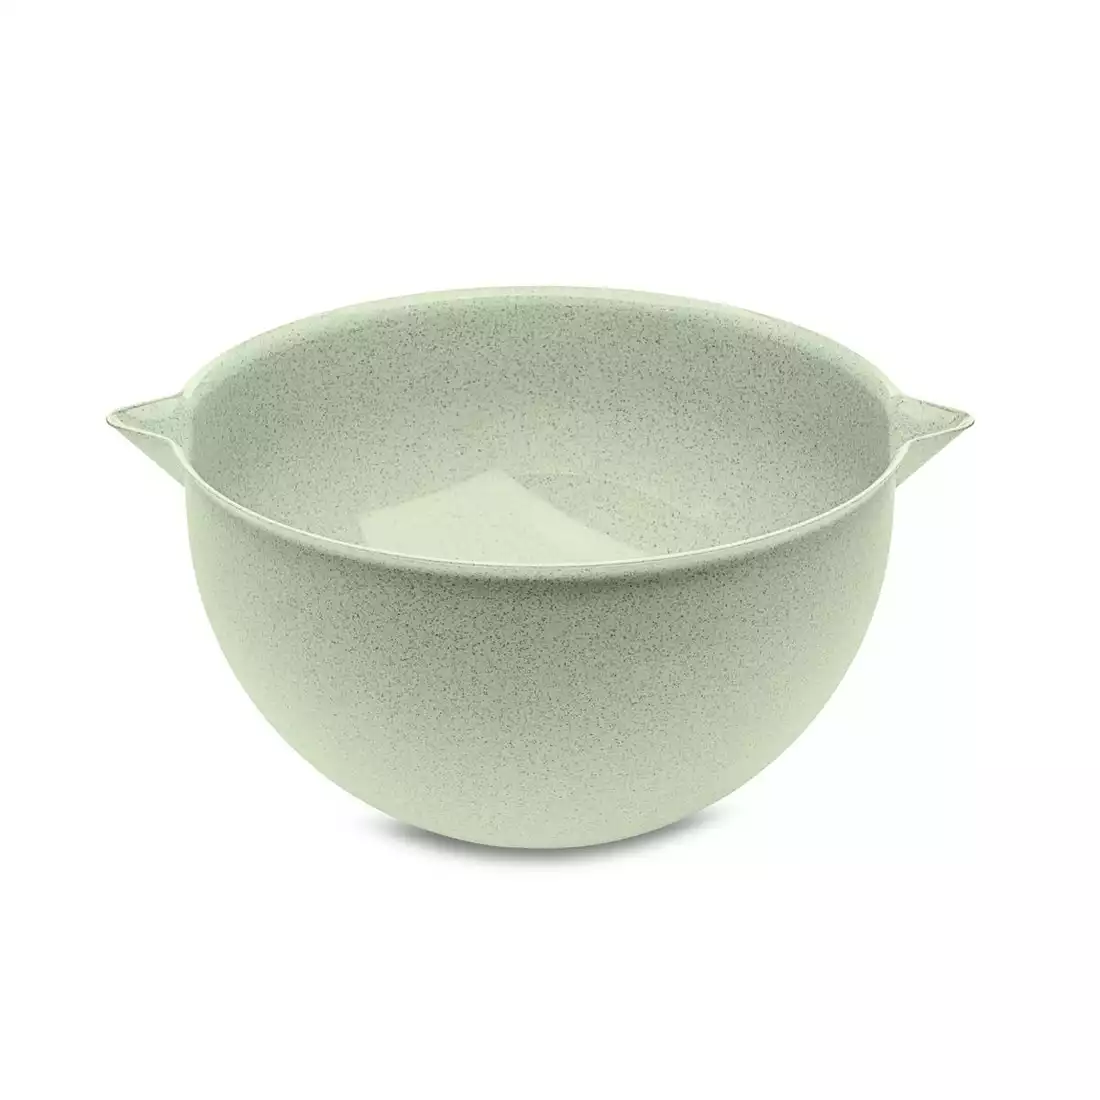 KOZIOL PALSBY round bowl with a spout 5L, organic green